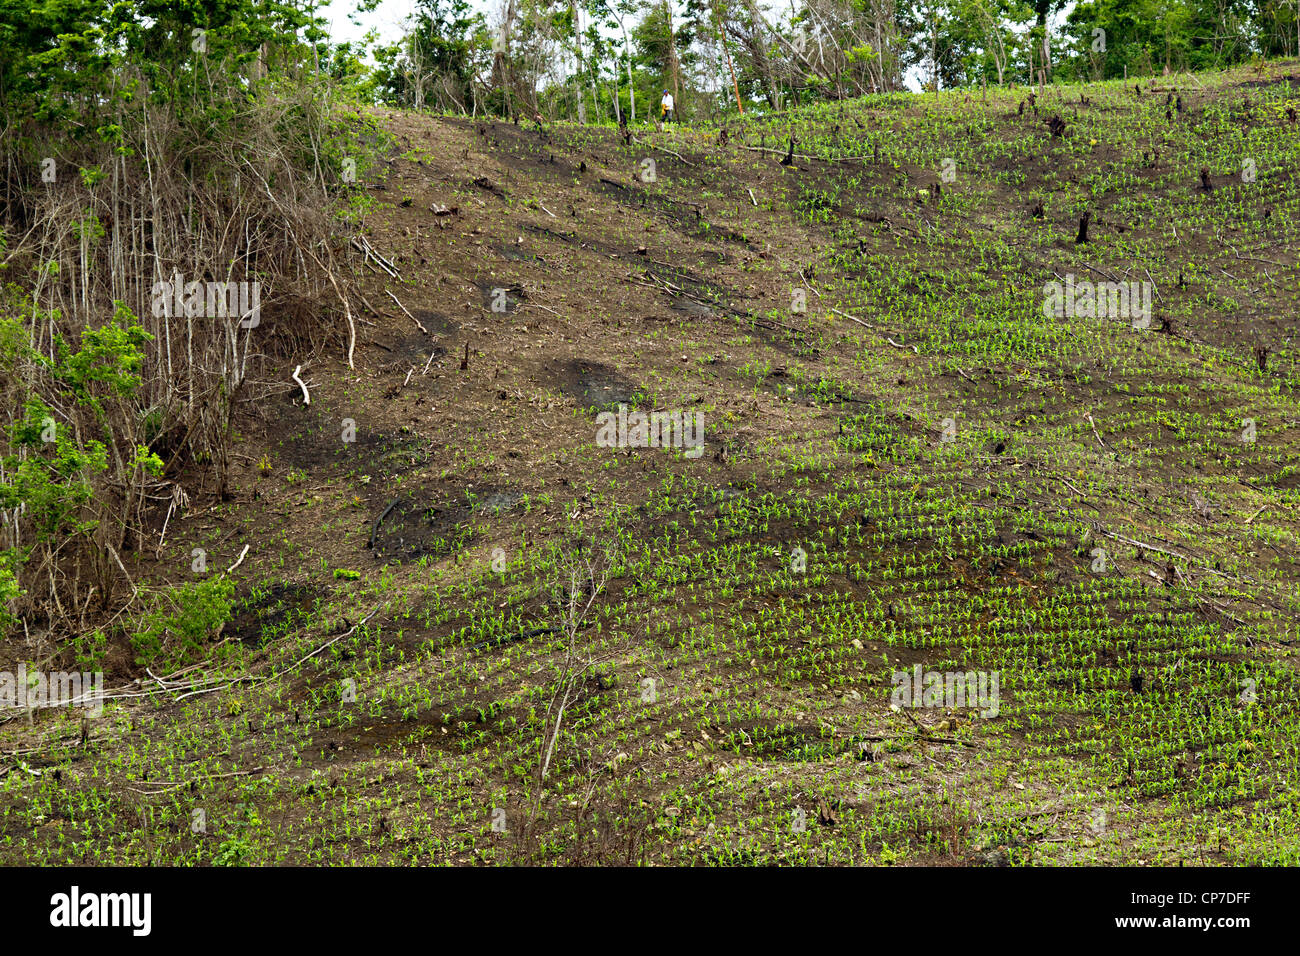 Slash and burn cultivation in Western Ecuador, steep slope cleared and planted with maize seedlings. Stock Photo